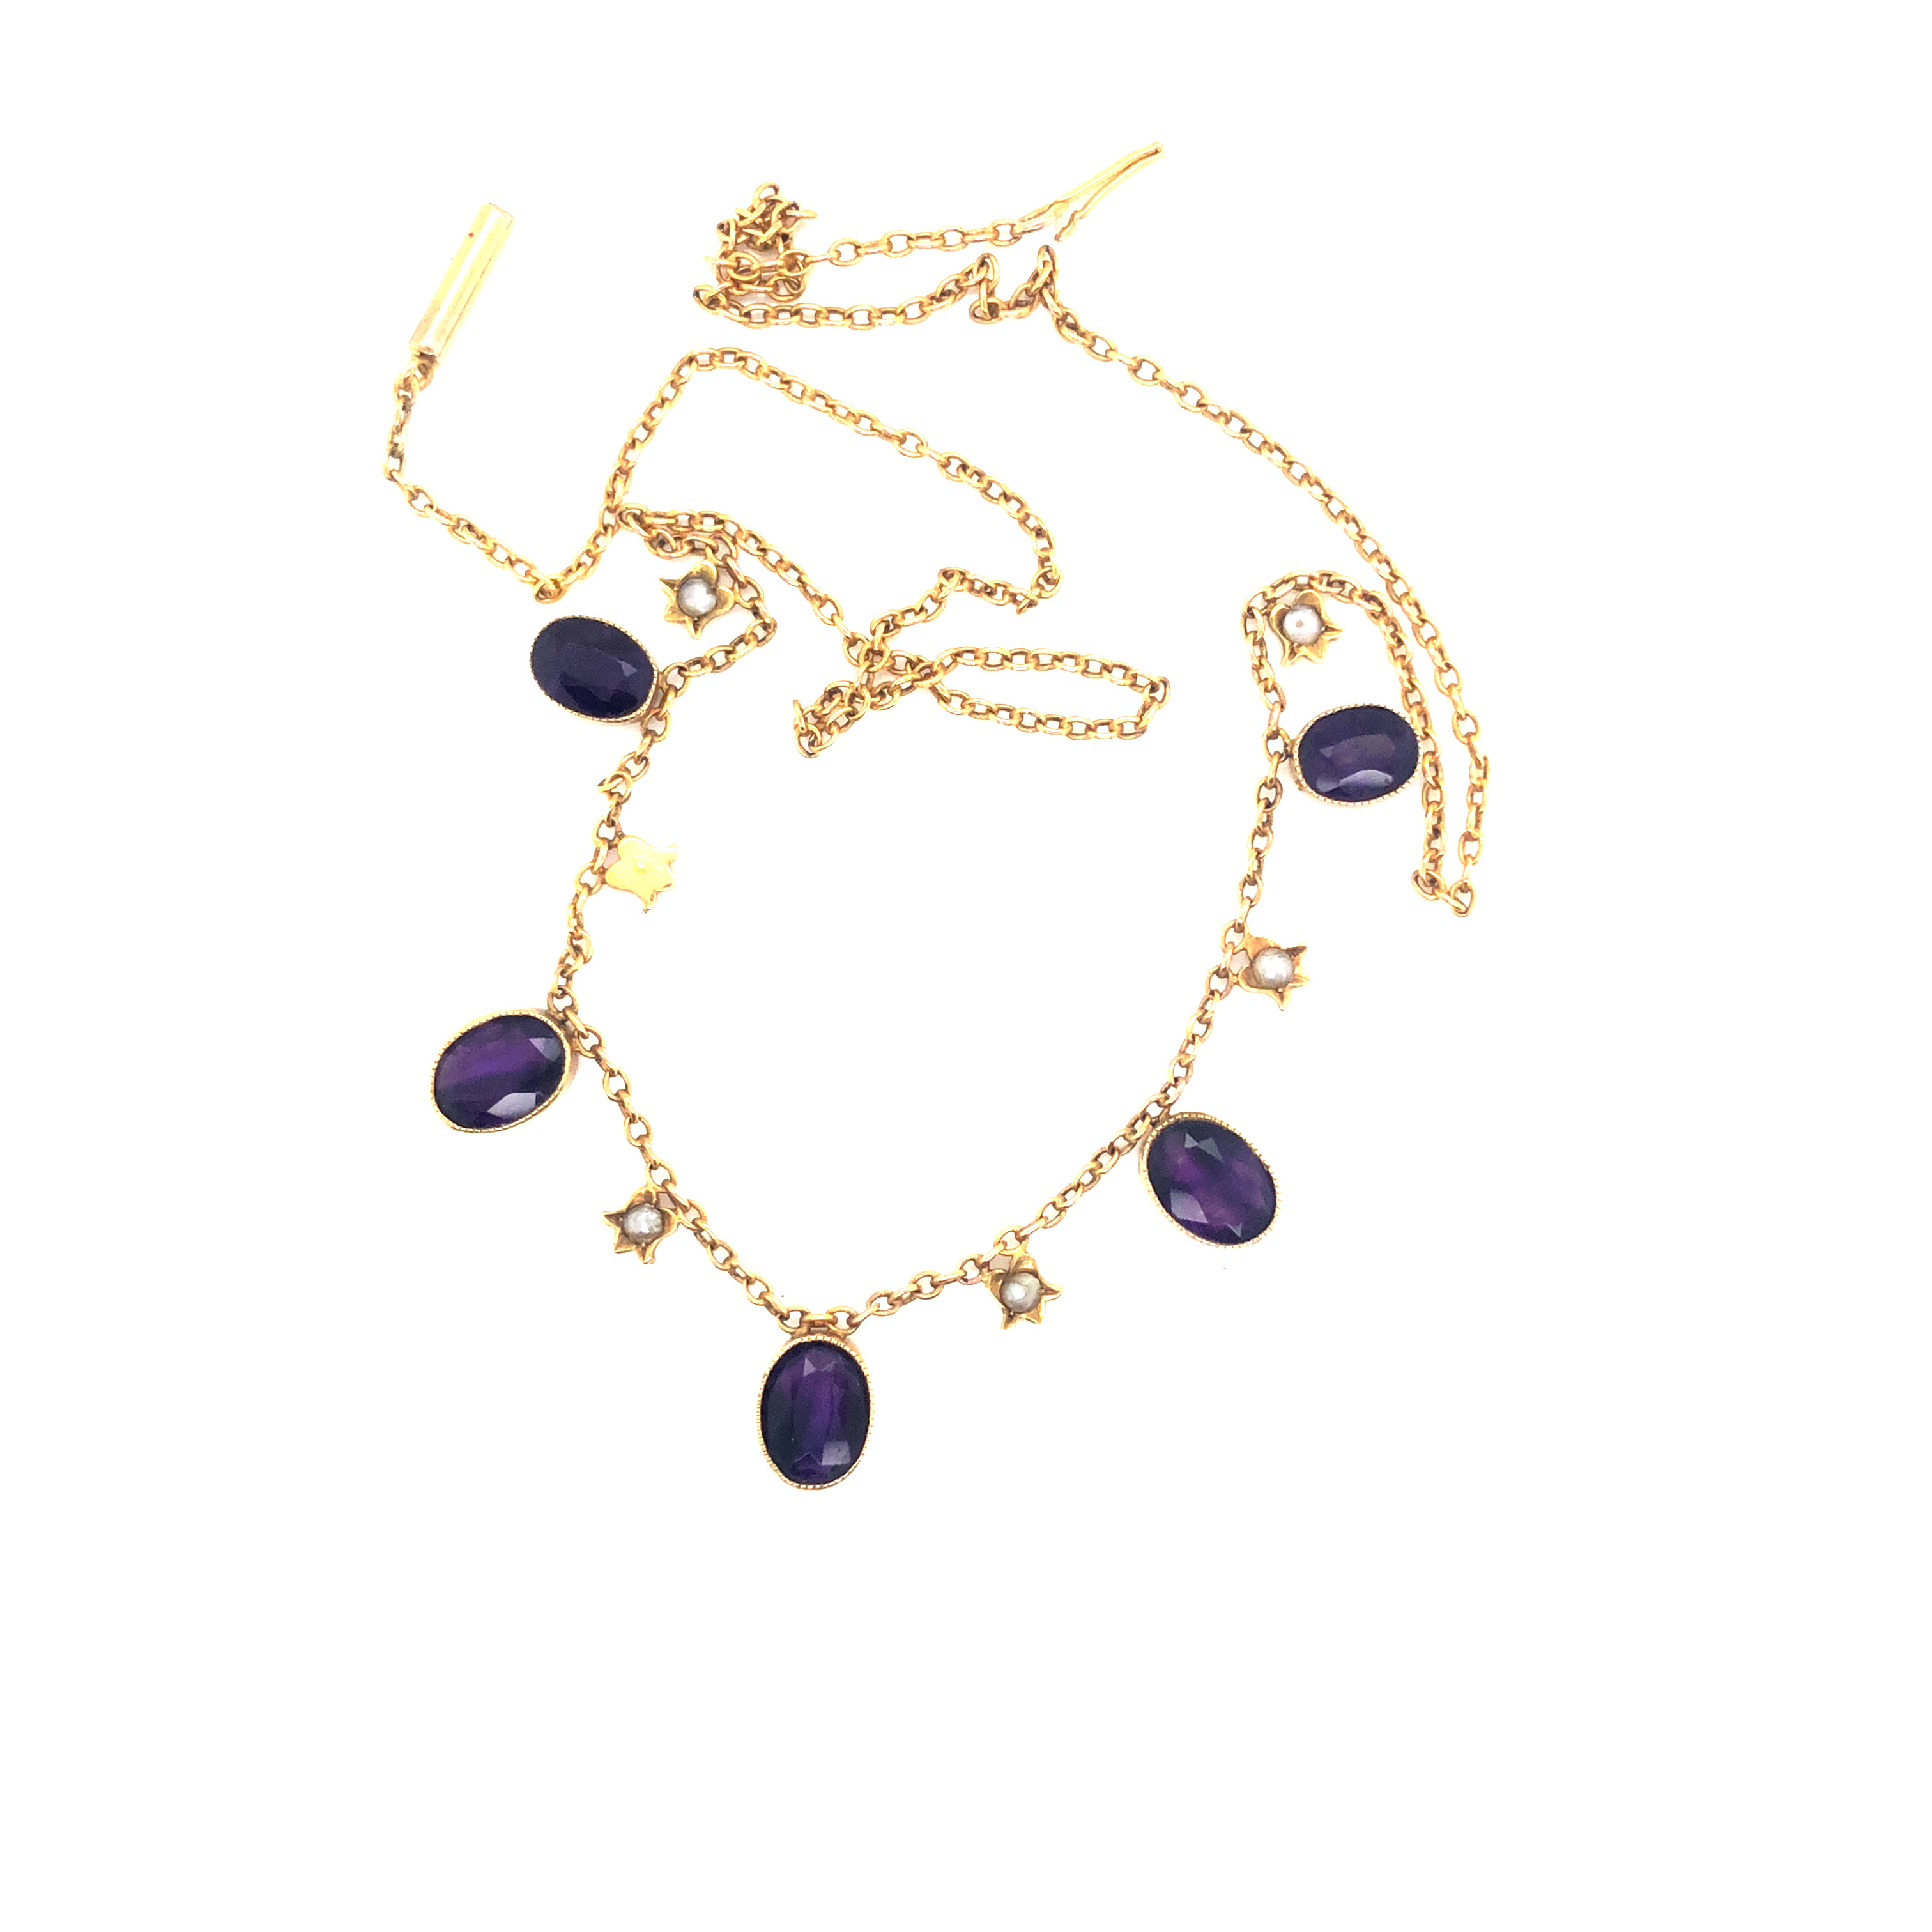 AN ANTIQUE EDWARDIAN AMETHYST AND PEARL GARLAND NECKLACE. UNHALLMARKED AND ASSESSED AS 9ct GOLD. - Image 3 of 3